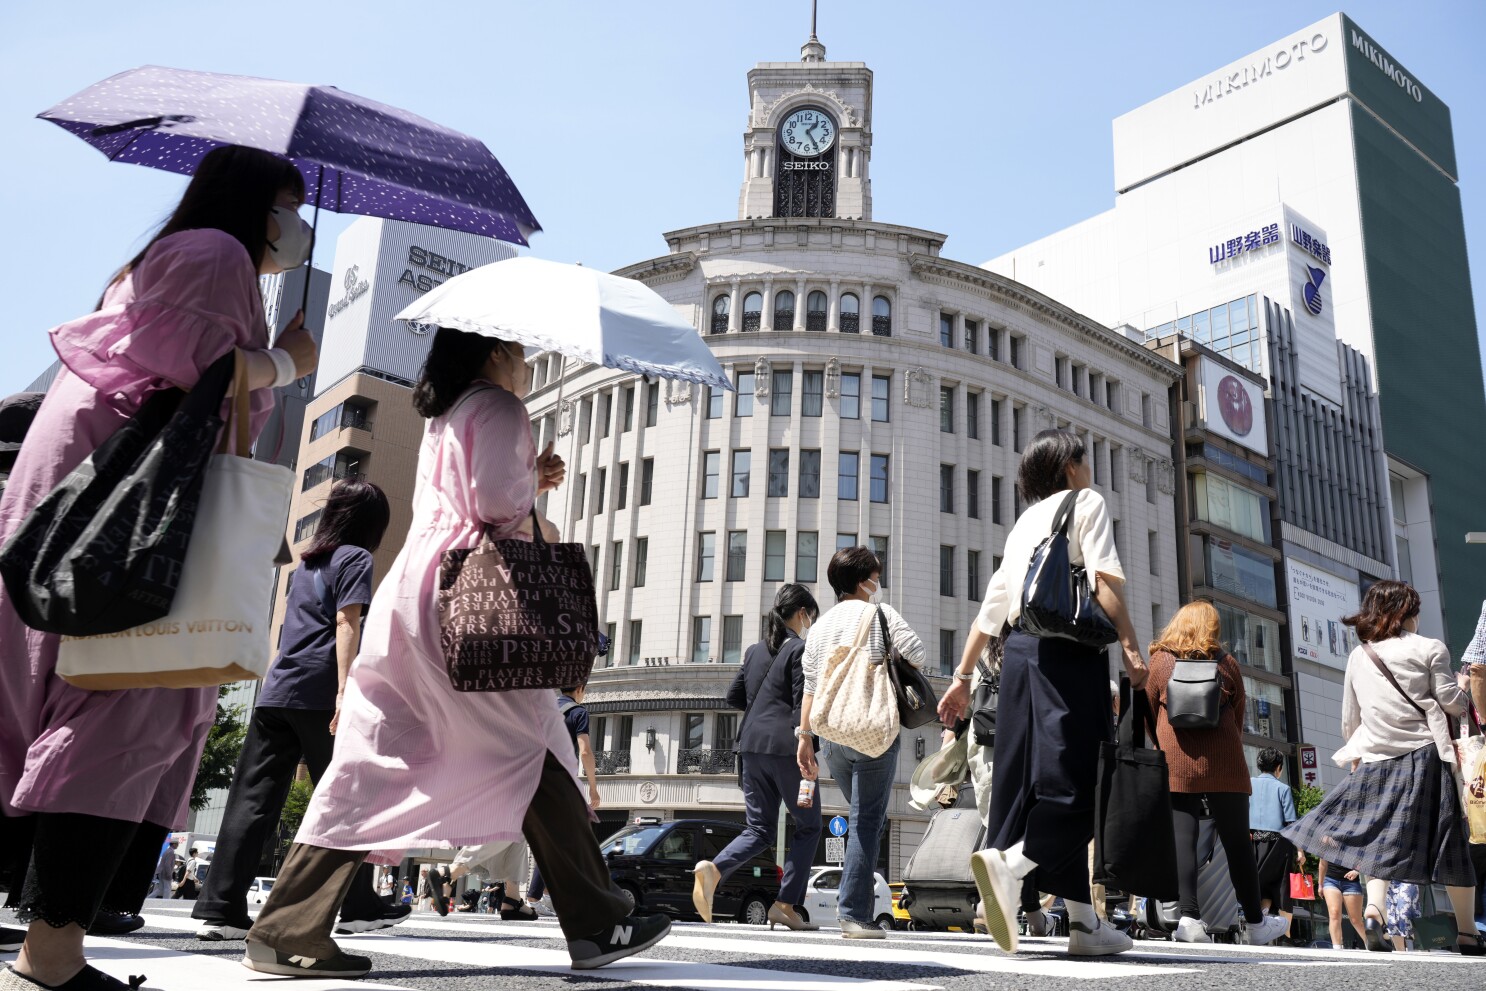 Wages are finally rising in Japan, as inflation eats away at